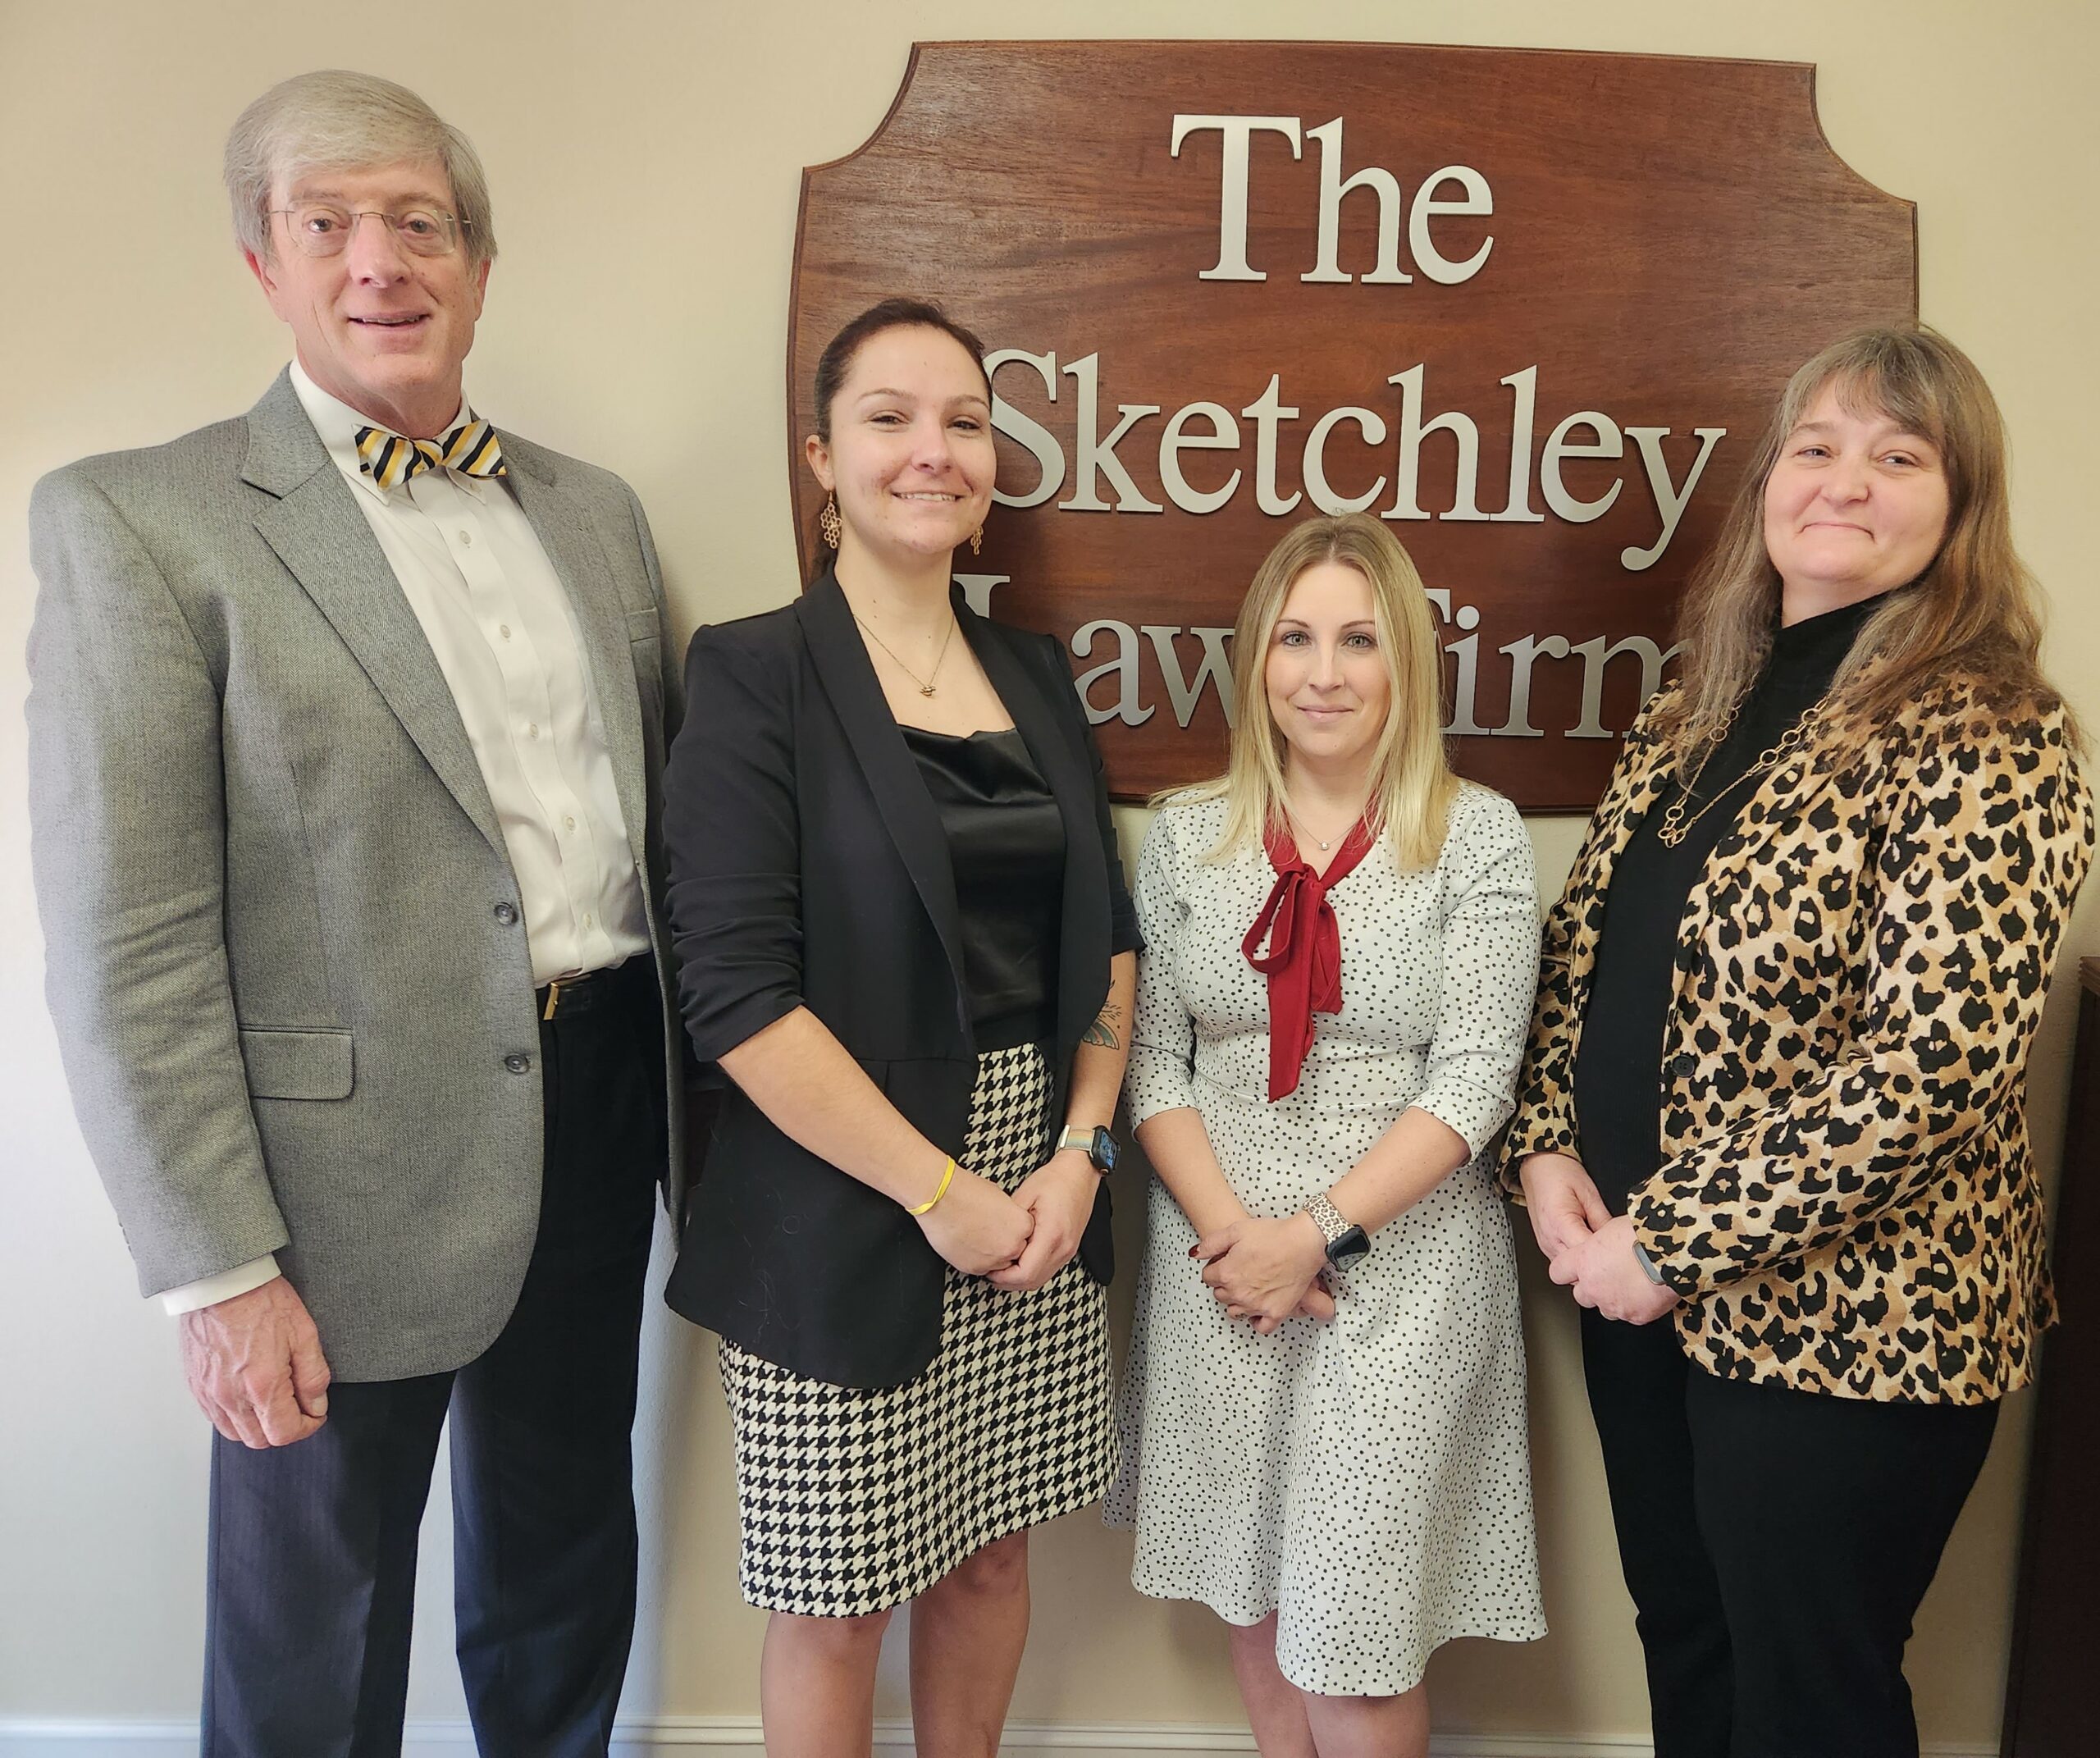 Picture of The Sketchley Law Firm team